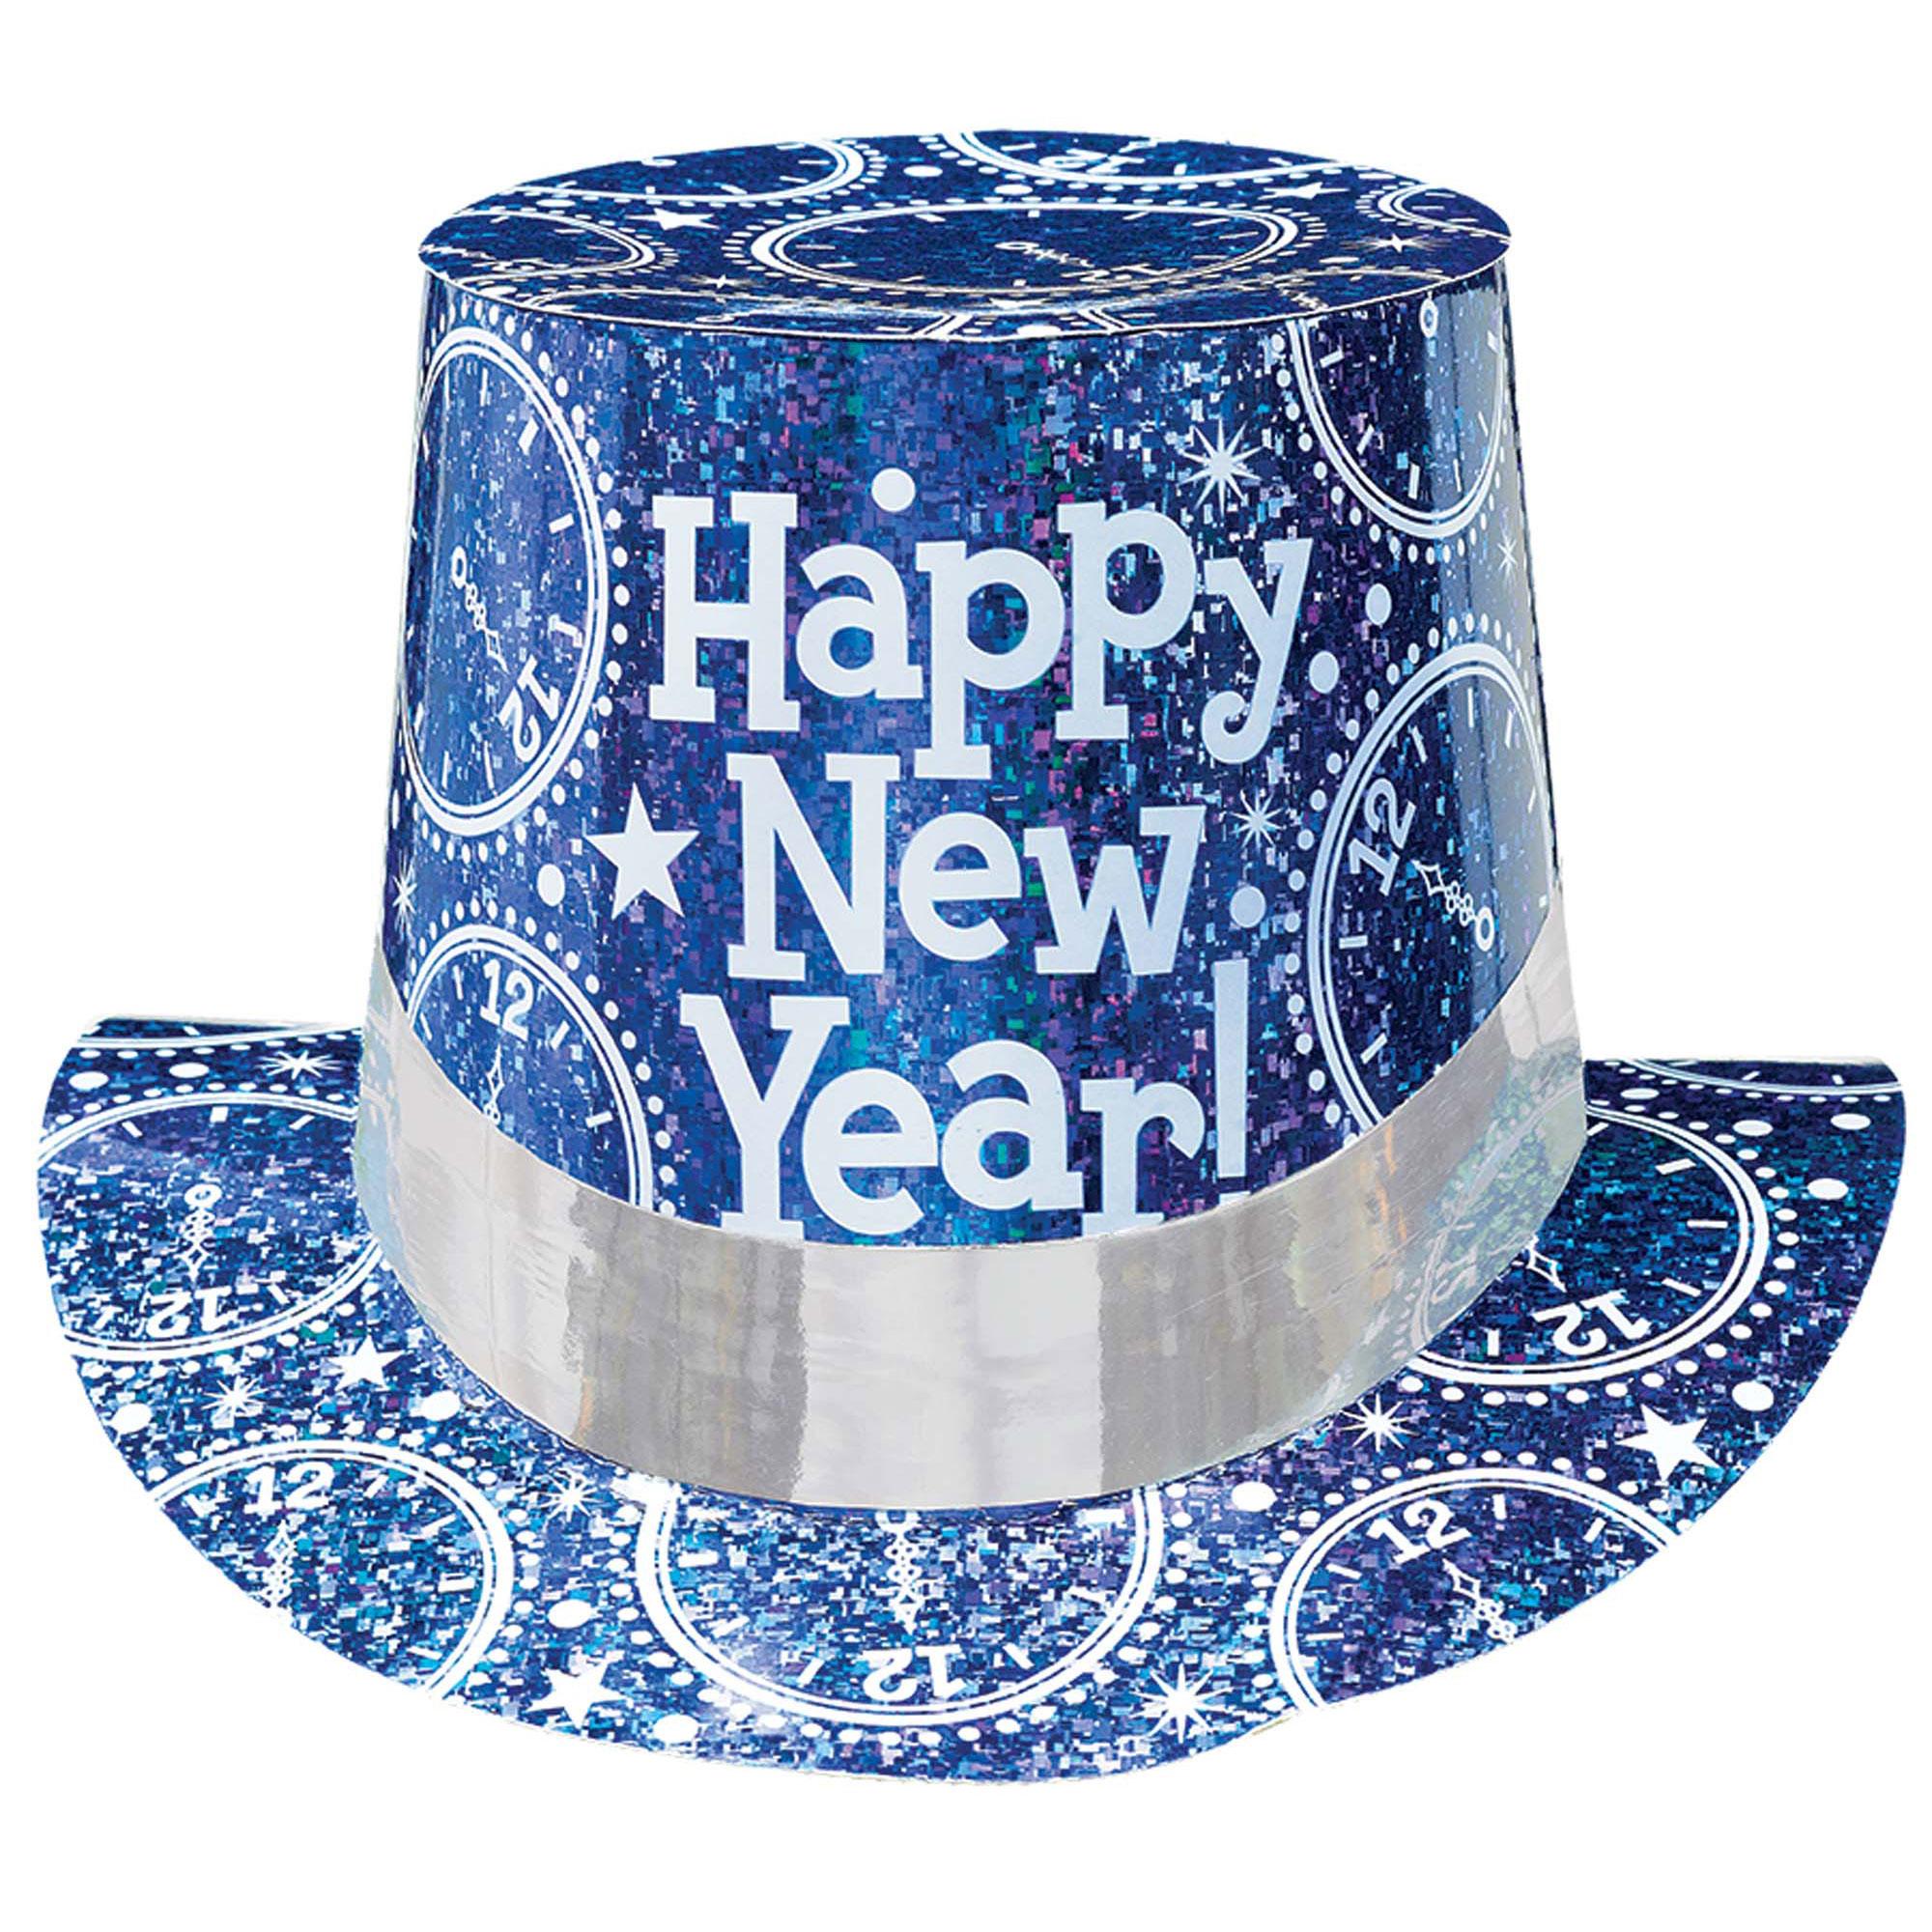 Prismatic Blue New Year Top Hat Costumes & Apparel - Party Centre - Party Centre